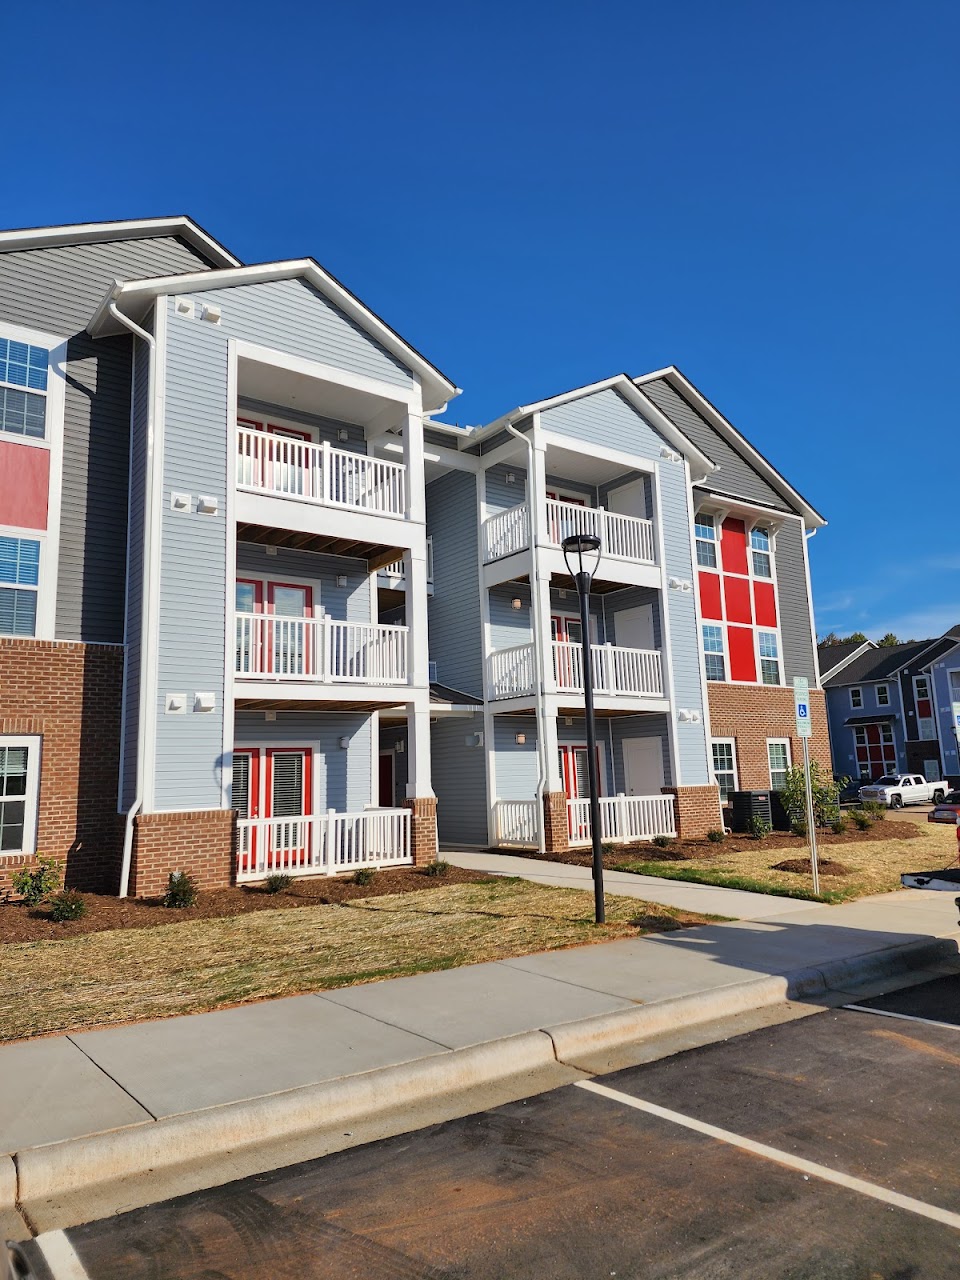 Photo of REDHILL POINTE. Affordable housing located at 2931 W VANDALIA RD GREENSBORO, NC 27407